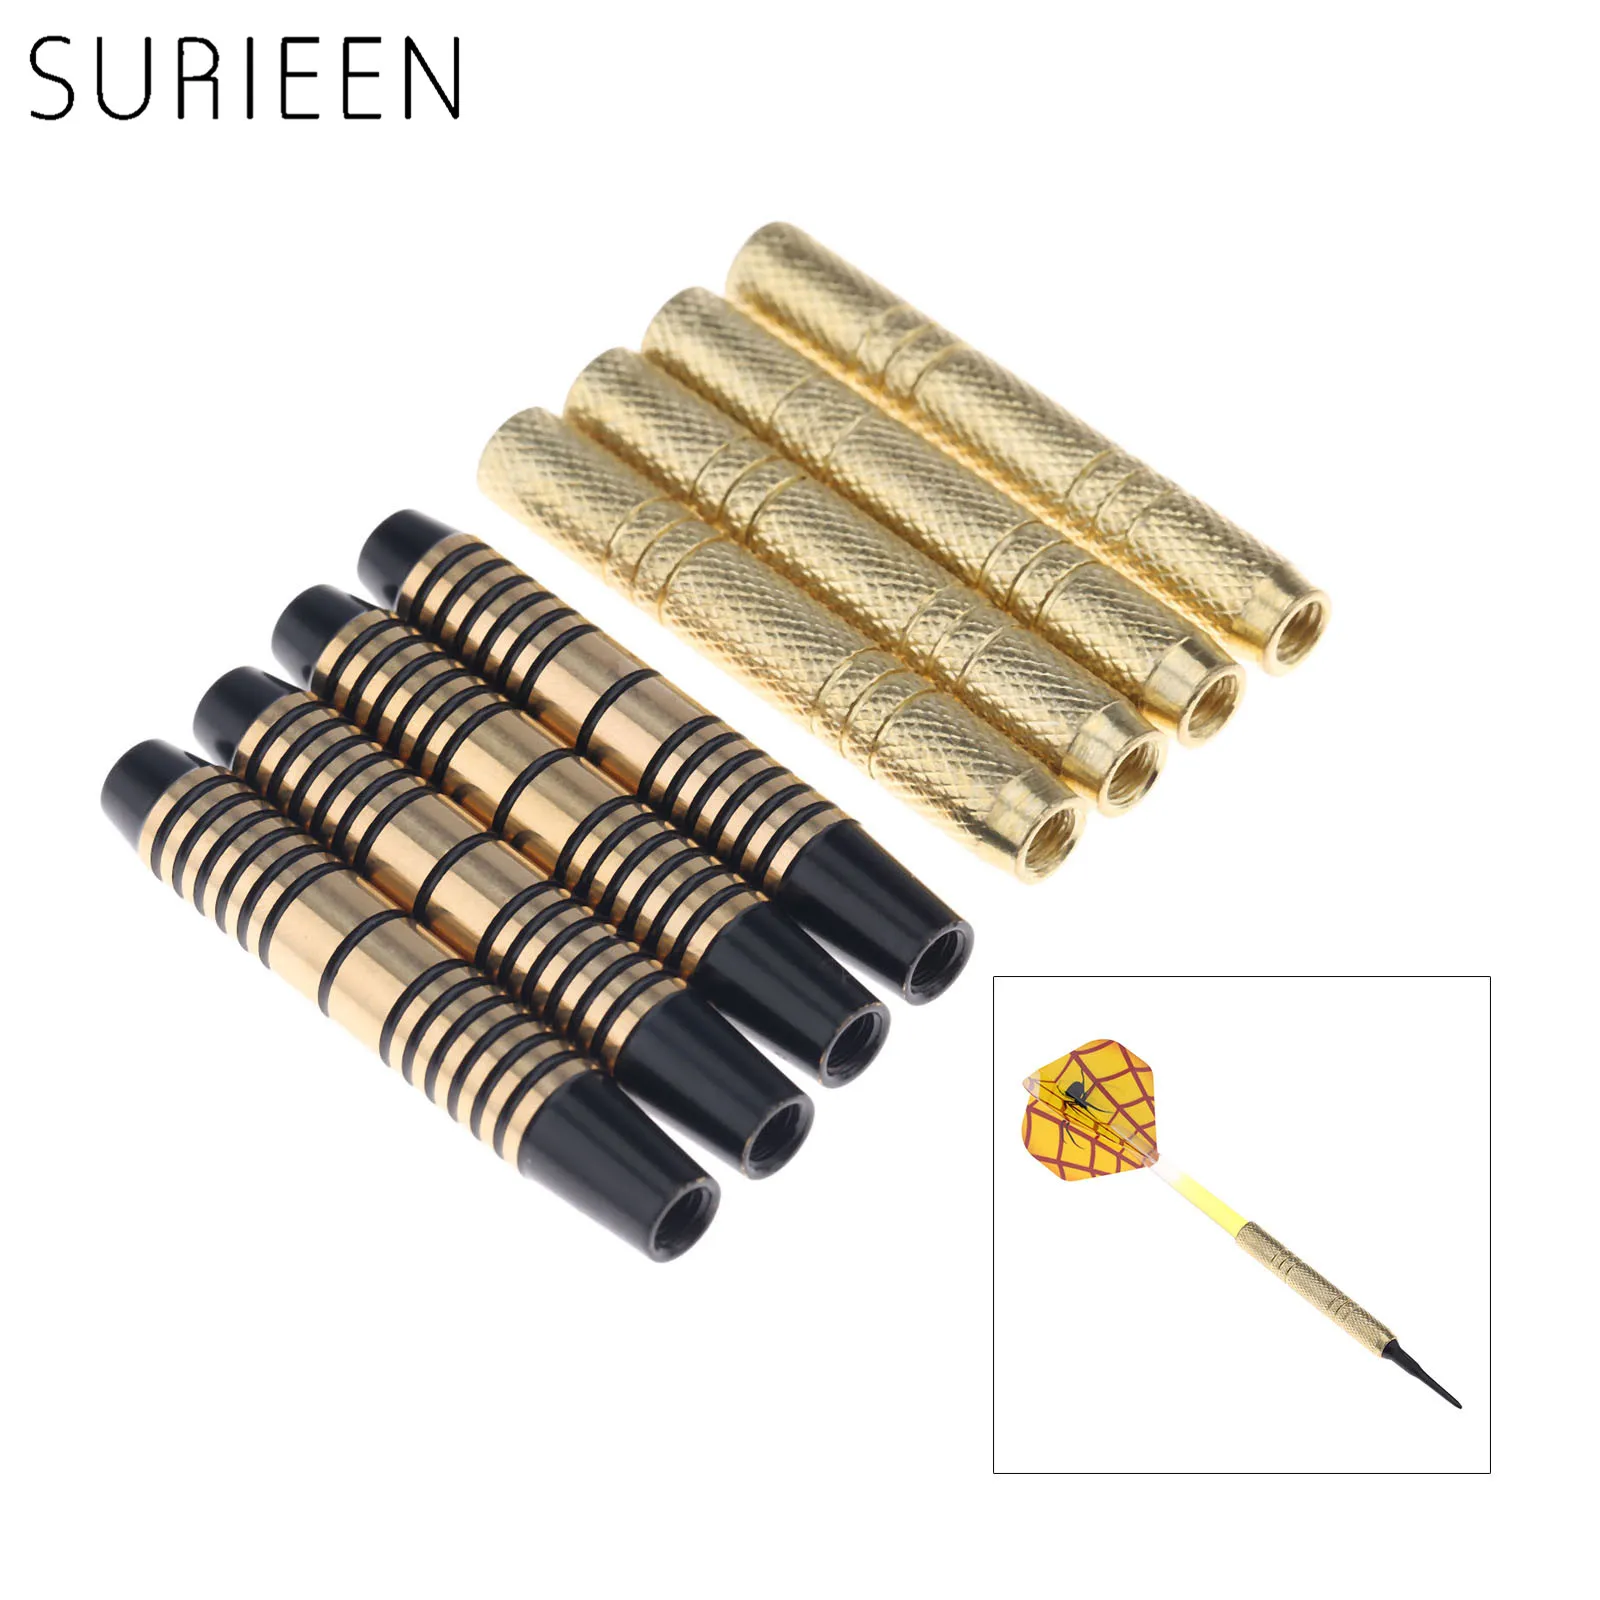 SURIEEN 4 pieces Professional Copper Dart Barrel for Nylon/Steel darts tip Dart Accessories 47mm-12g / 49mm-16g with 2BA Thread diameter 47mm glass bottles with cork jewelry package for wedding gifts wrapping 50ml empty jars reusable container 24pcs